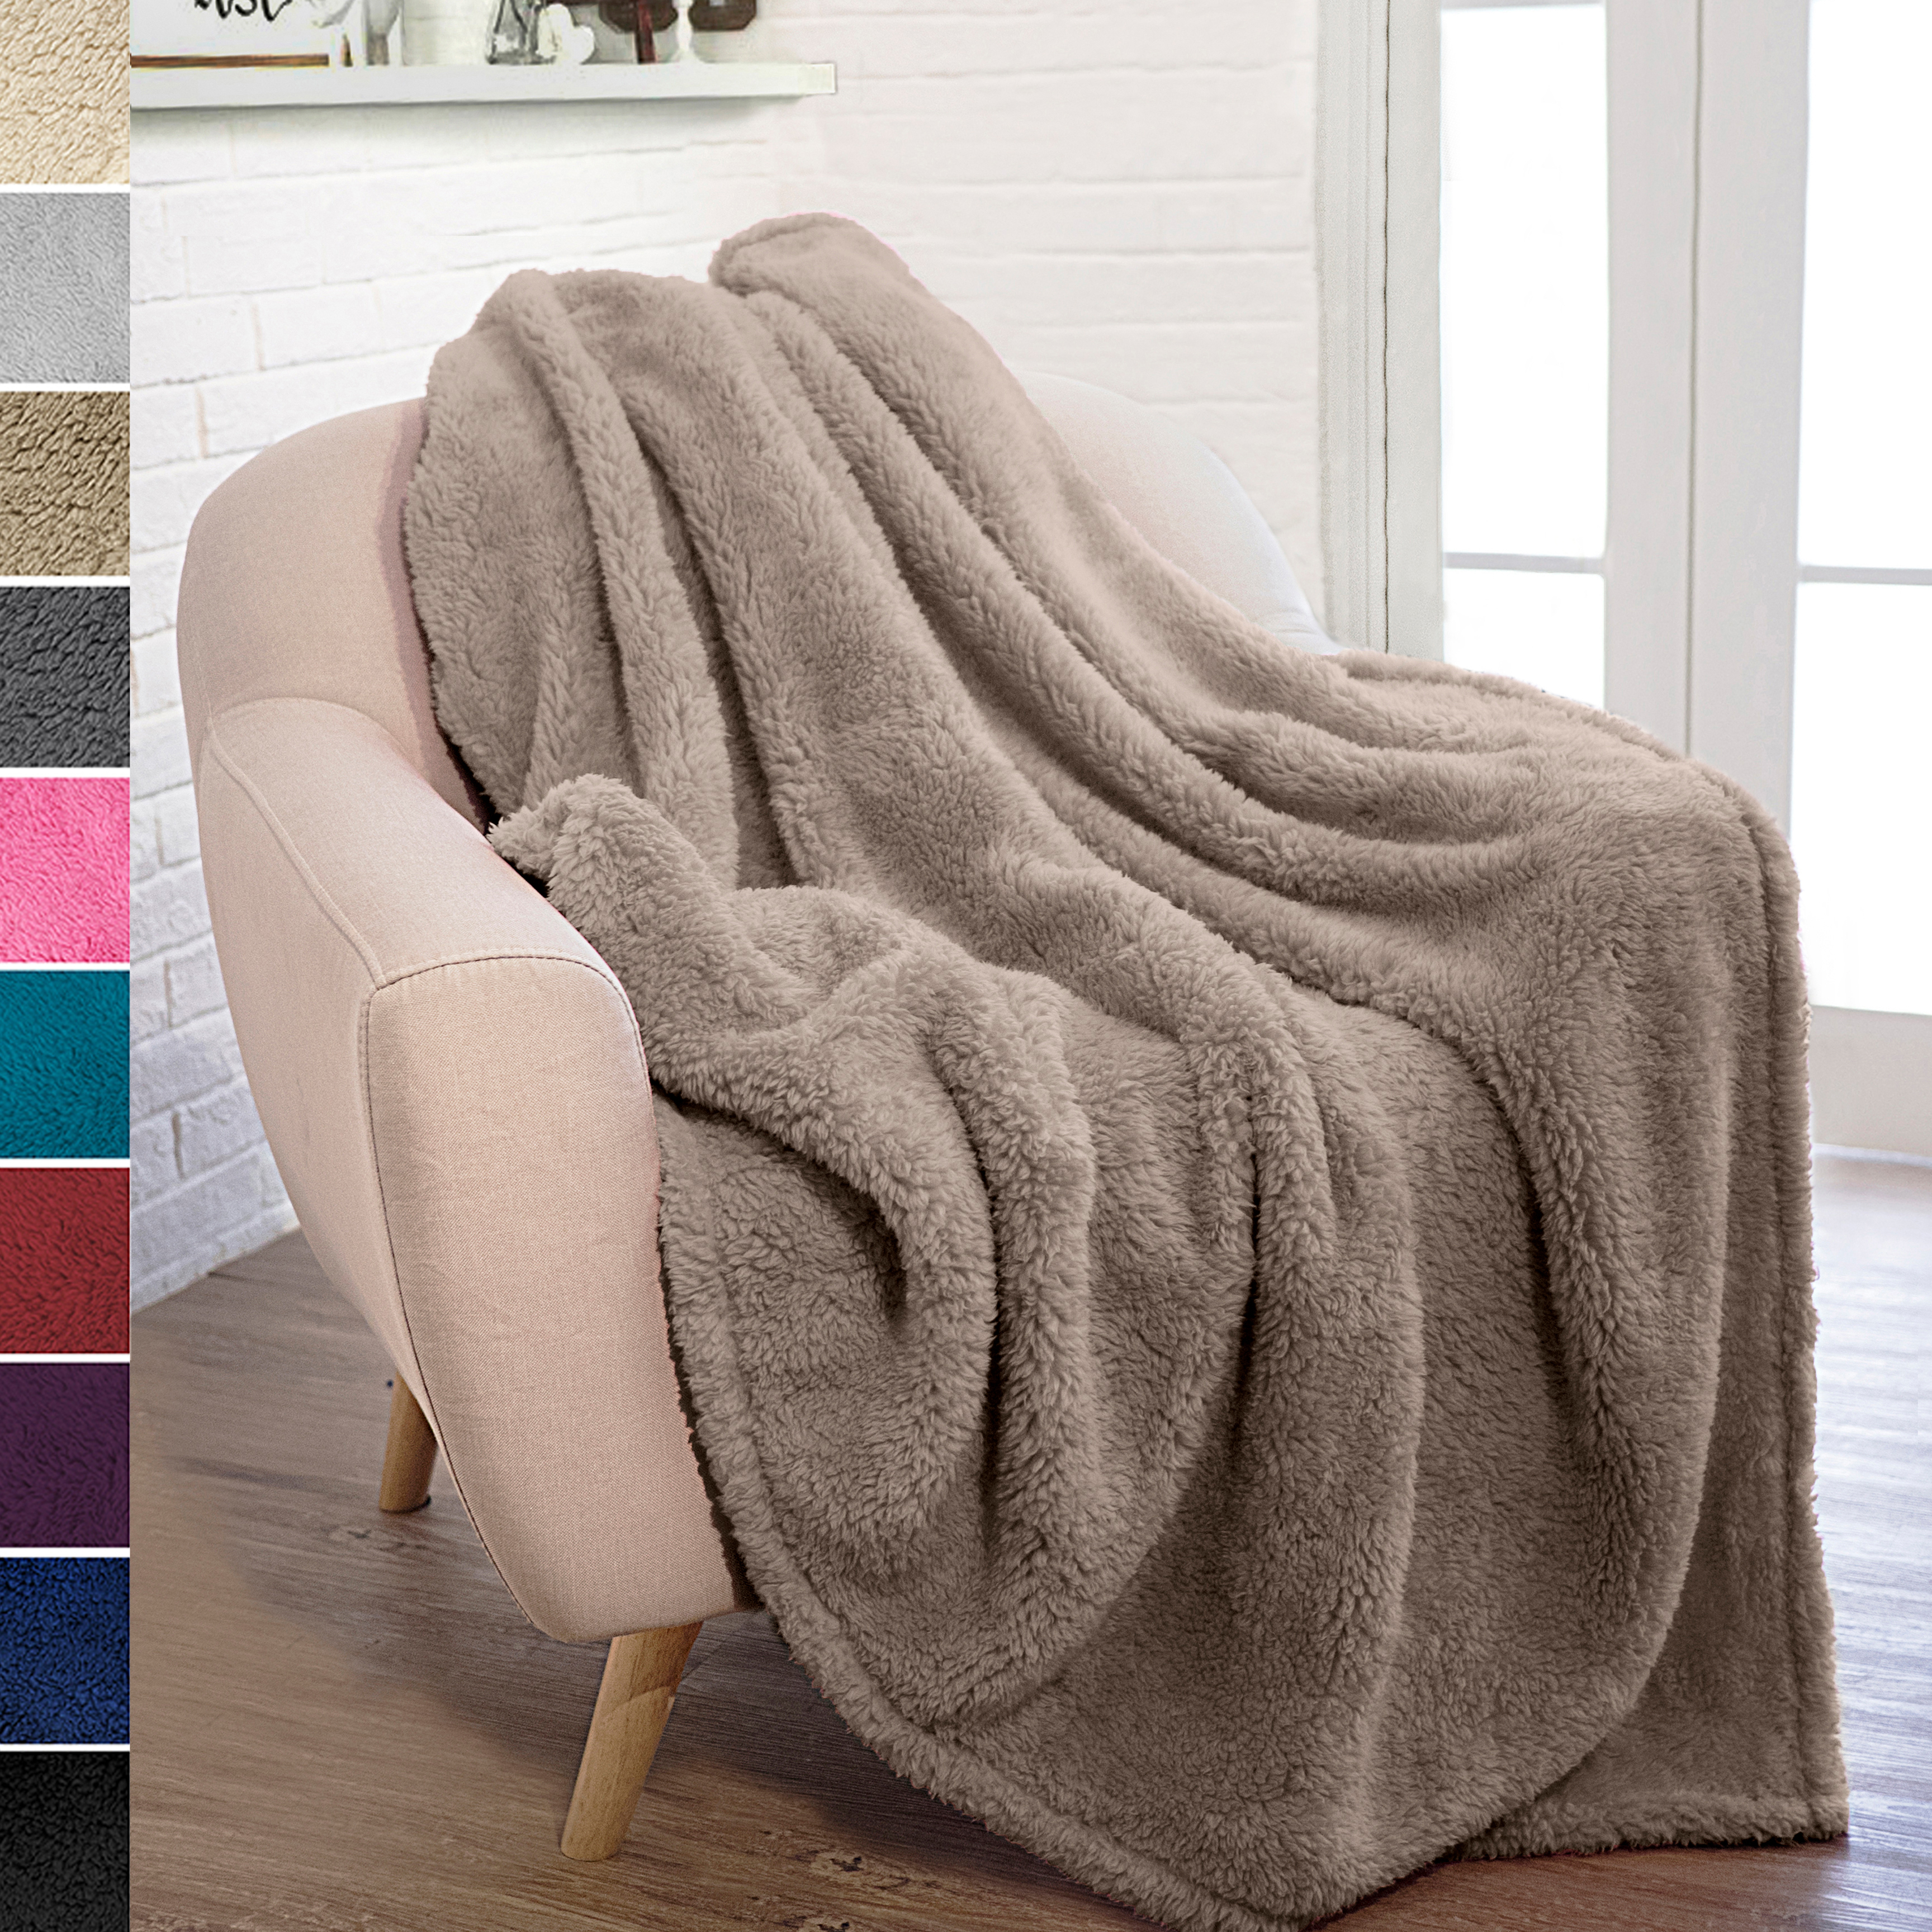 49 x 79 Inches Reversible Microfiber Blanket for Bed Sofa Couch Cozy Sherpa Fleece Blanket Ultra Soft Throw Blanket Happy Easter Retro Egg Bowknot Gift Ancient Graphic Fuzzy Warm Shaggy 